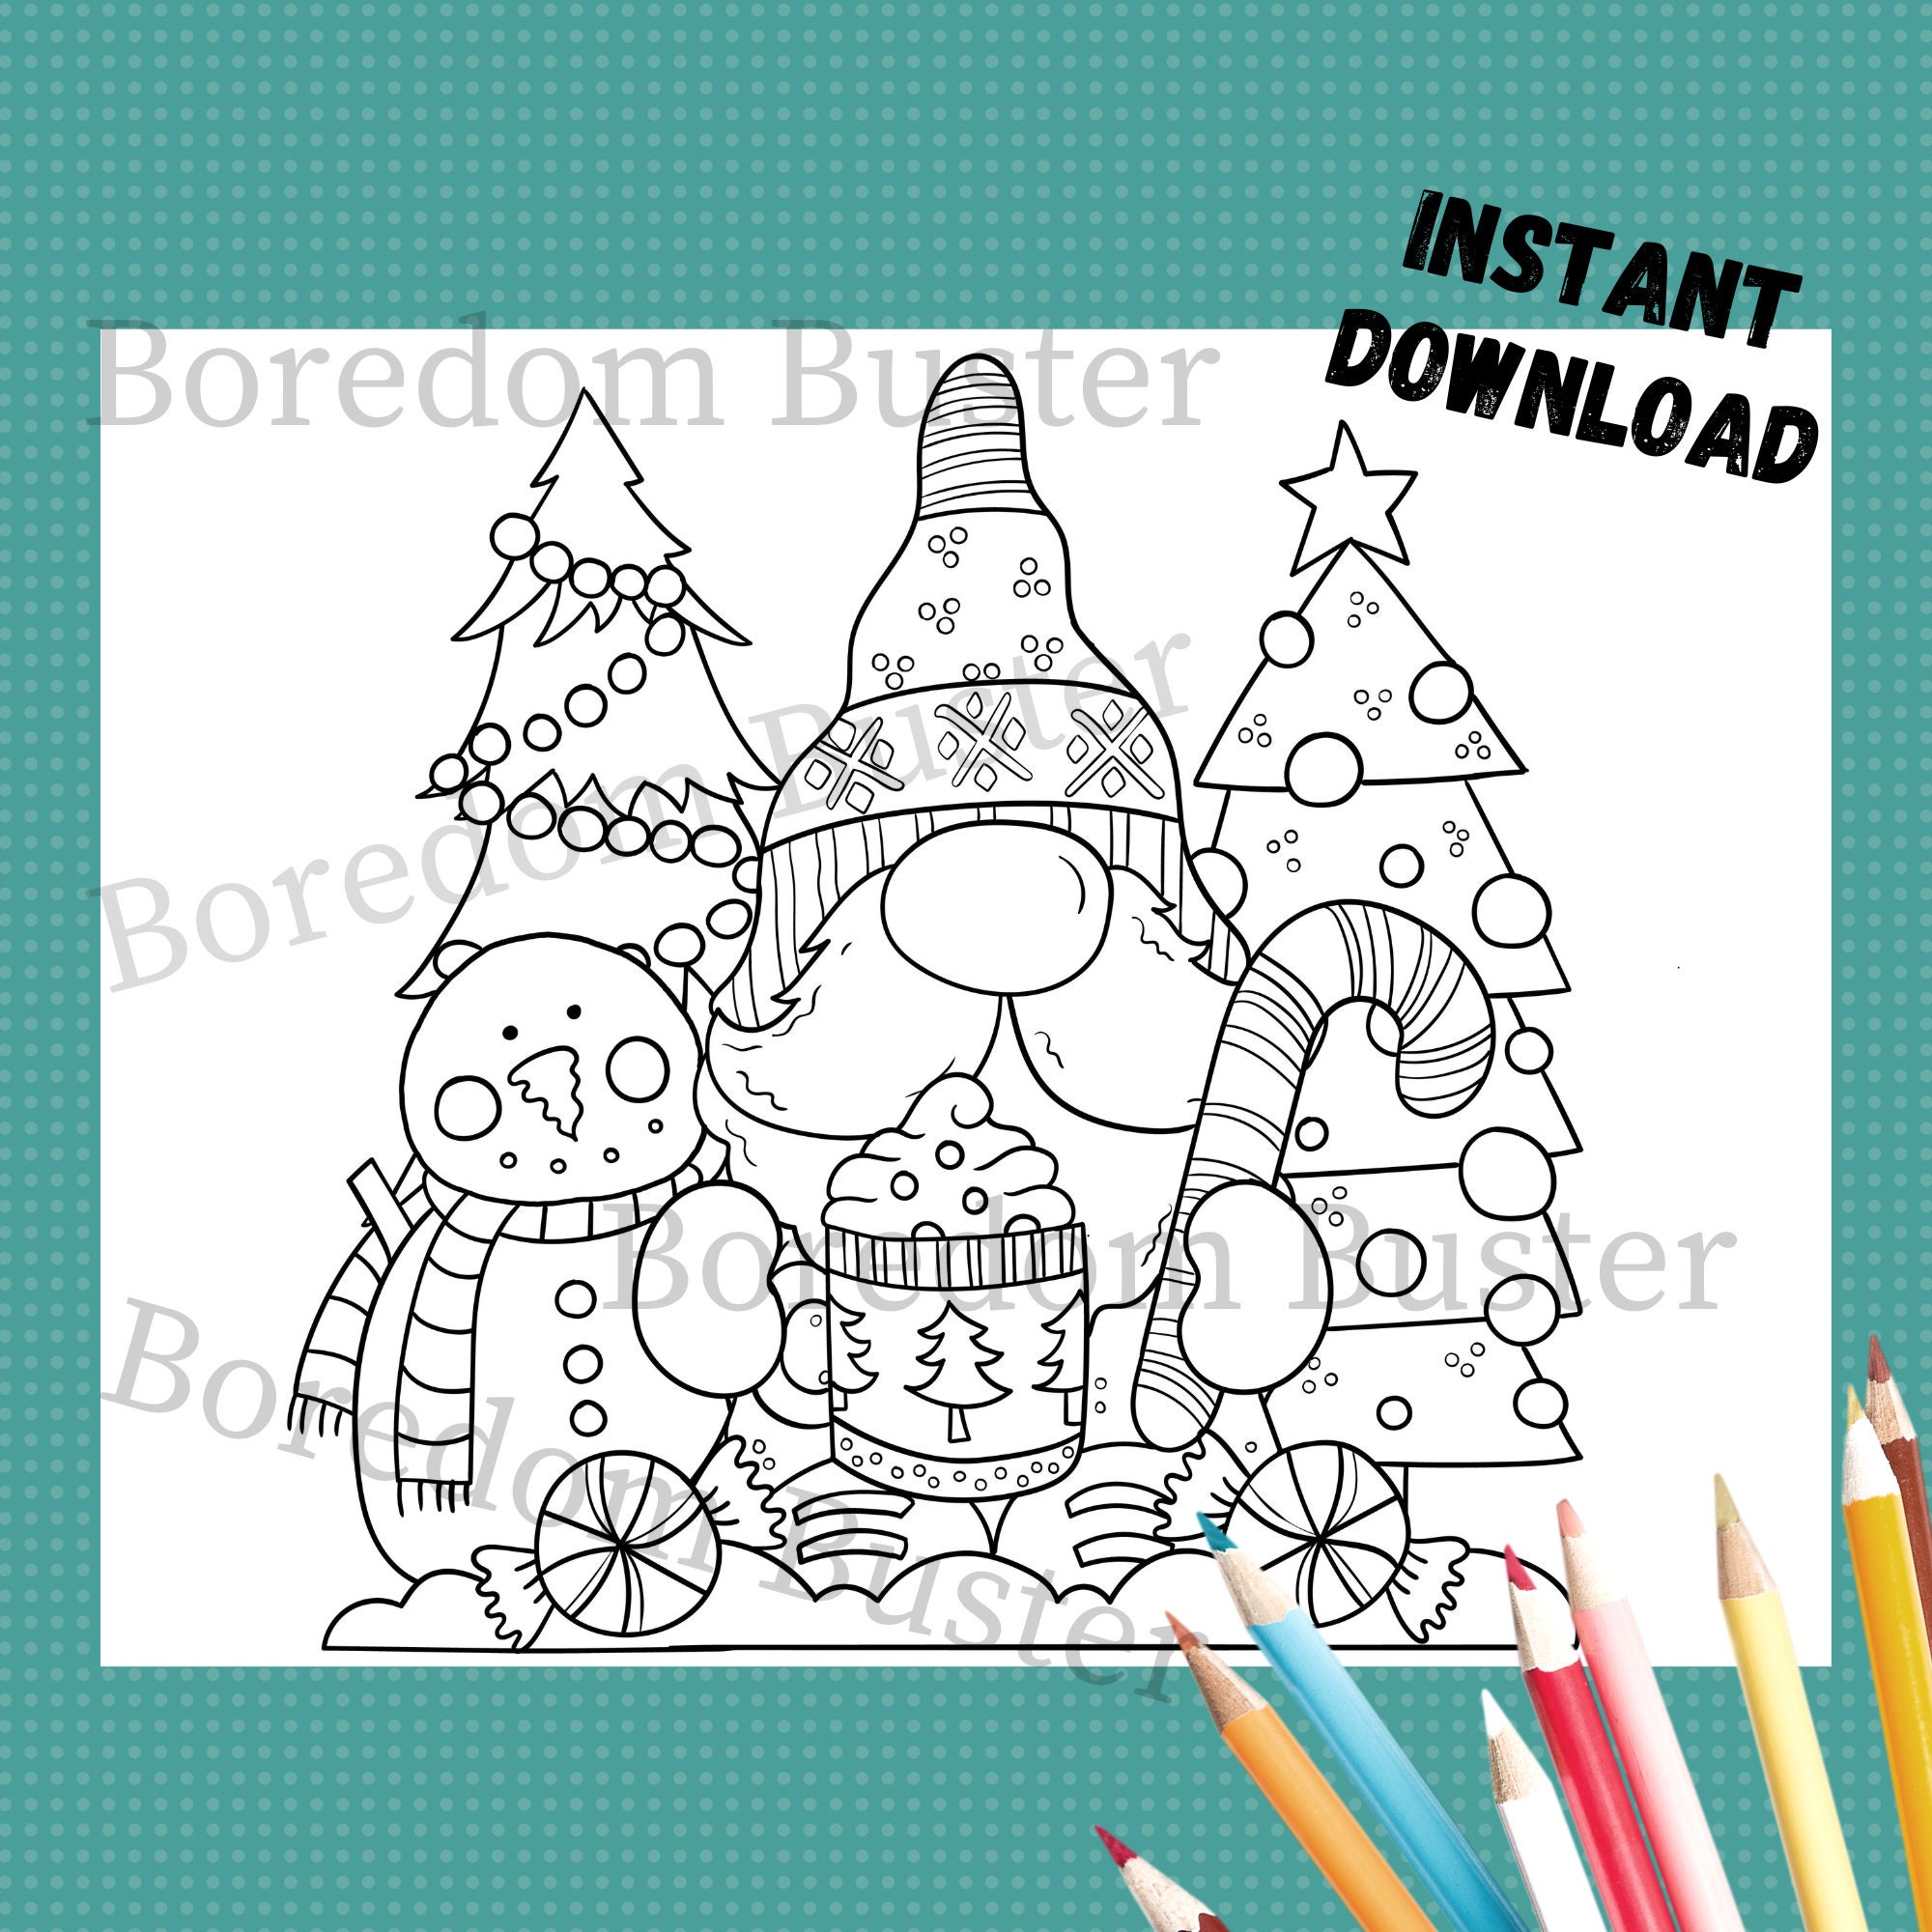 49 Coloring Pages With Cute Gnome Princesses, Coloring Pages for Adults and  Kids, Instant Download, Printable 